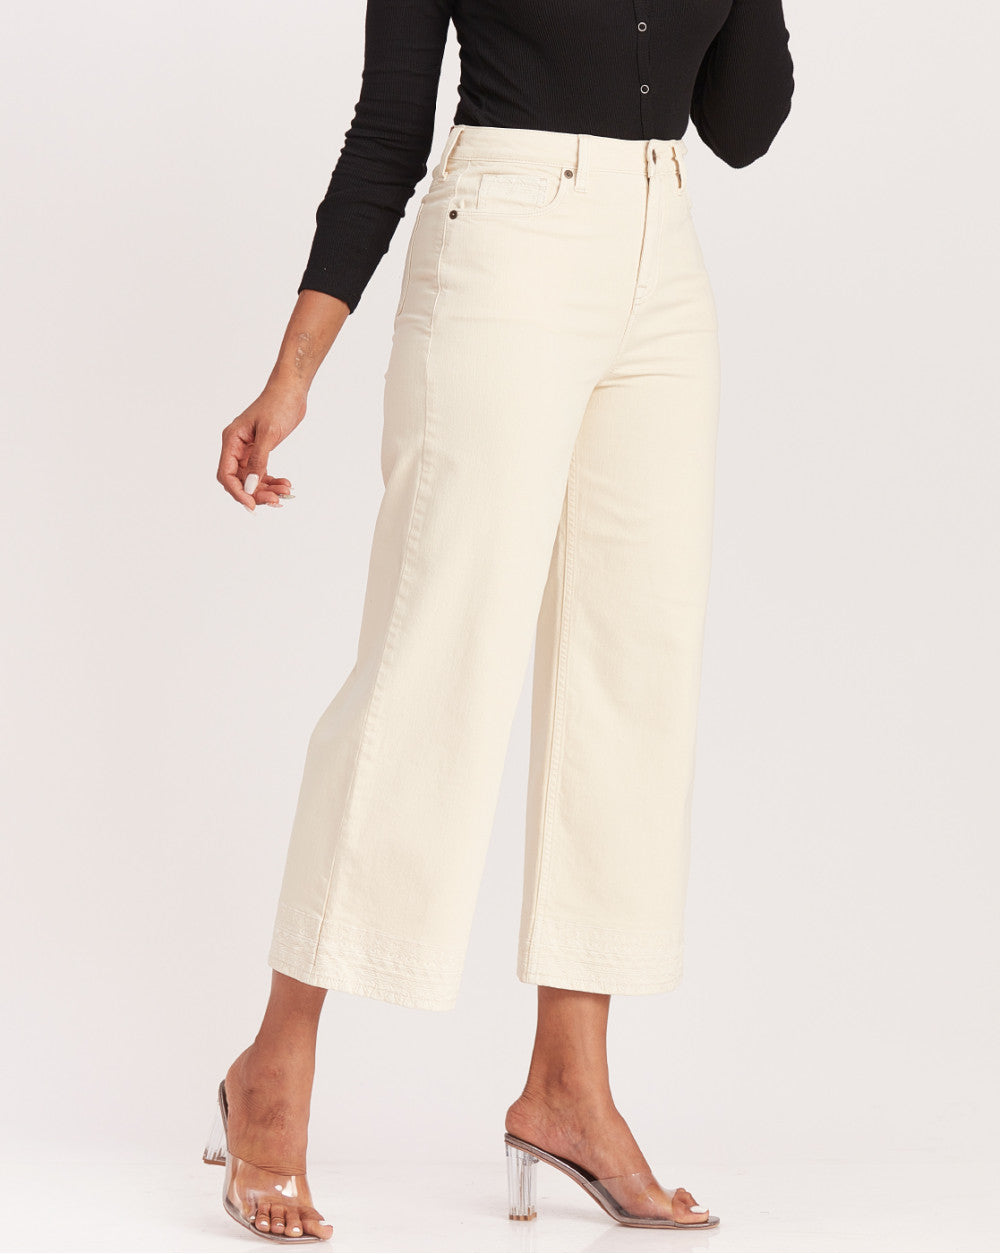 Wide Leg High Waist Boho Embroidered Colored Jeans - Cream